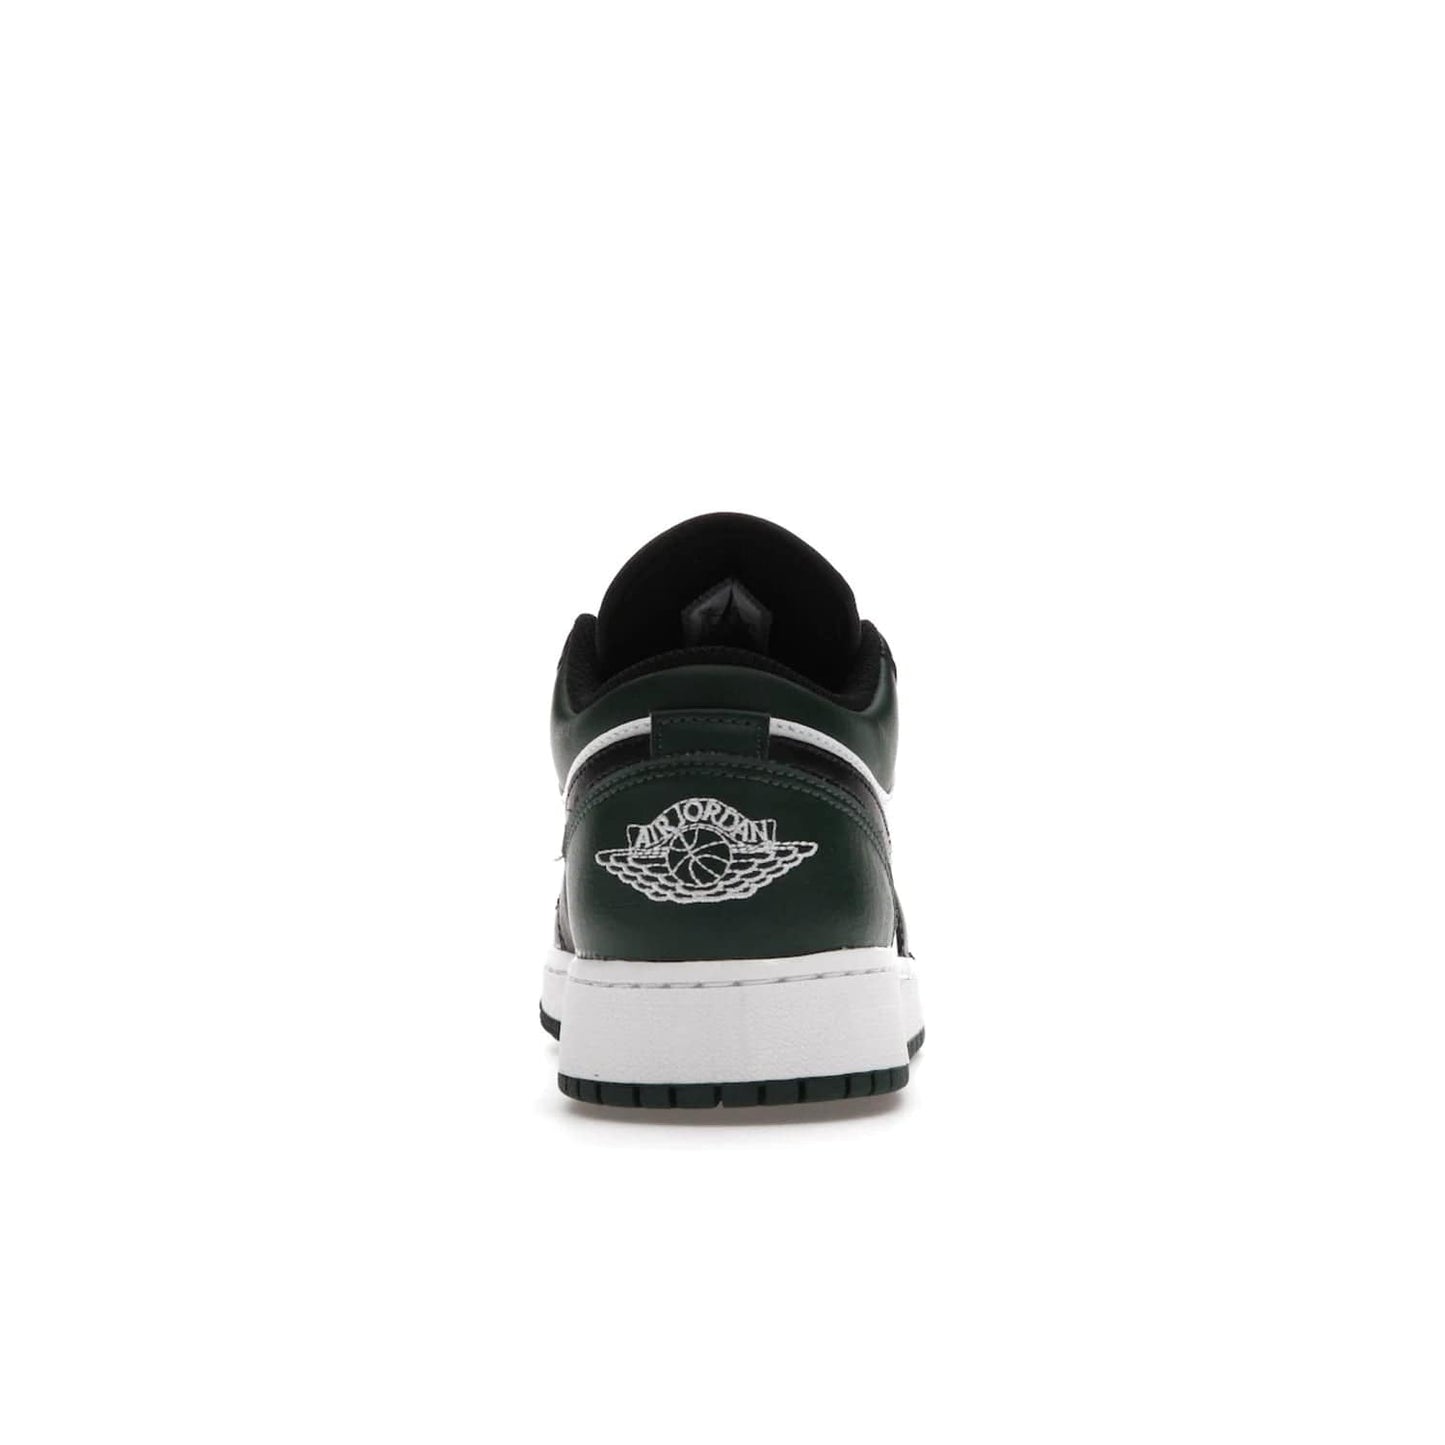 Jordan 1 Low Green Toe (GS) - Image 28 - Only at www.BallersClubKickz.com - Get the perfect low cut Jordans. Shop the Air Jordan 1 Low Noble Green GS shoes with its unique colorway and stencil Jumpman logo. Available October 2021.